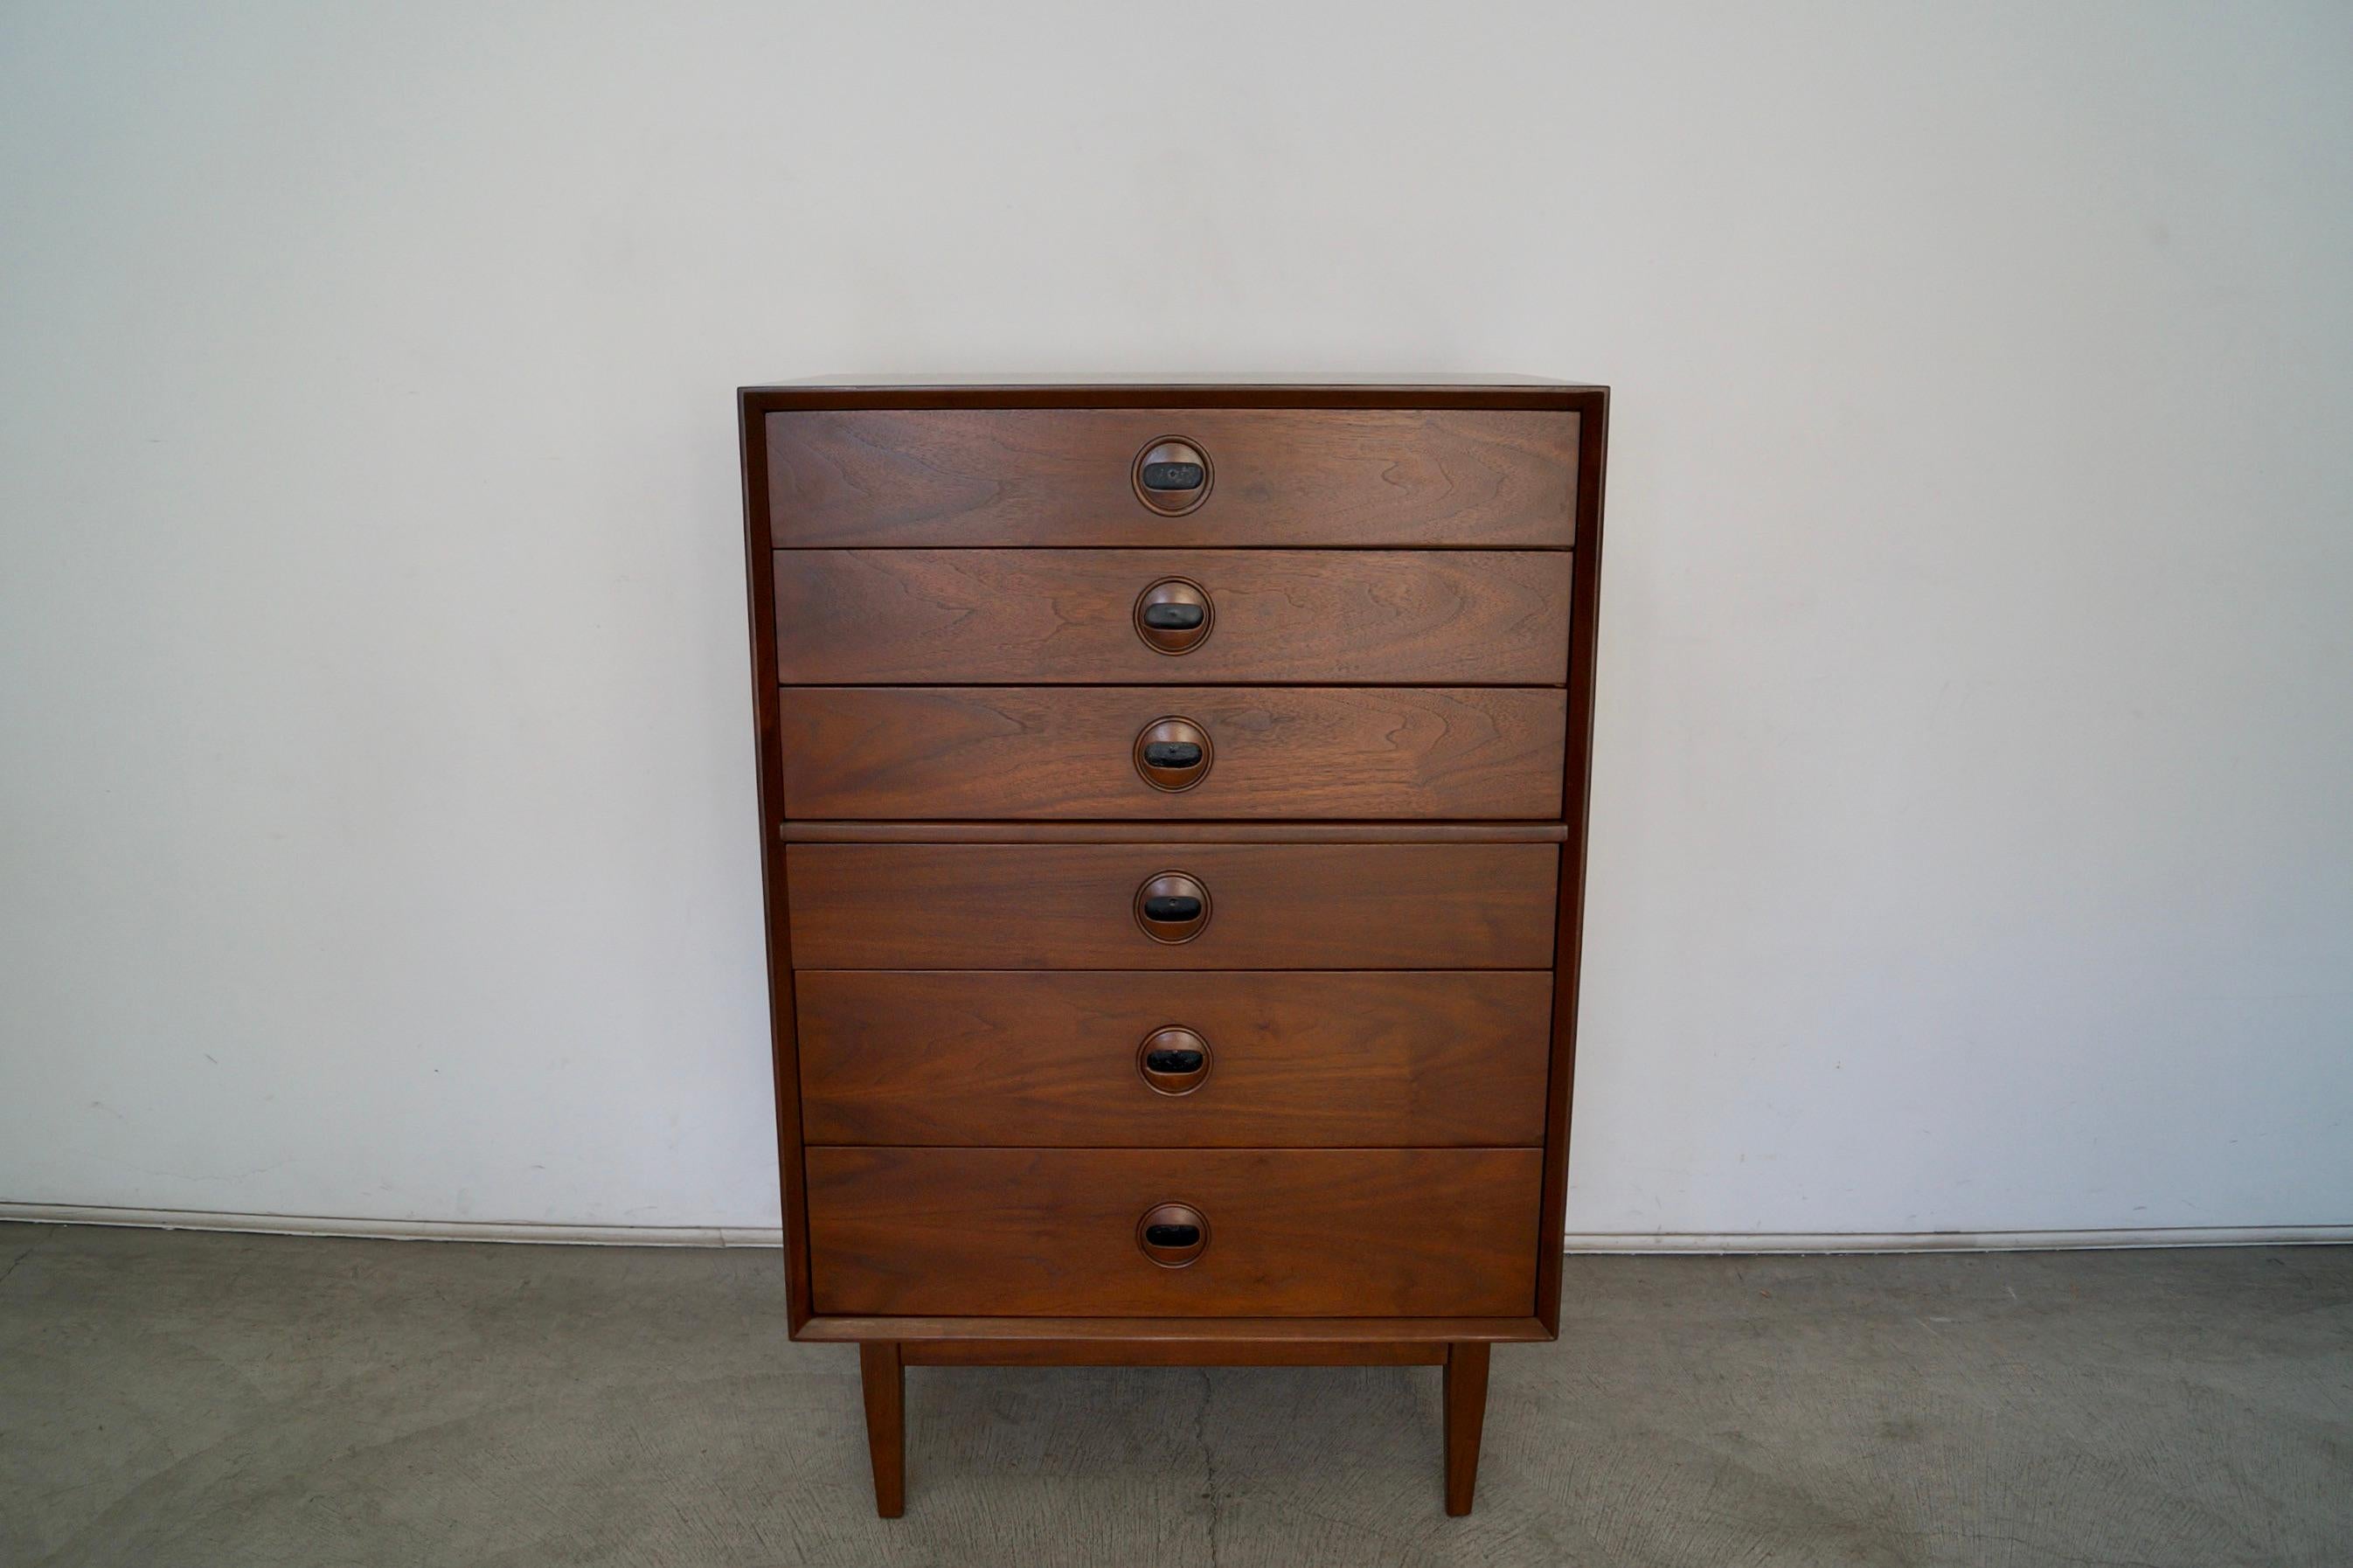 Vintage 1960s Mid-Century Modern highboy dresser for sale. Original Danish Modern dresser in walnut, and has been professionally refinished. It has six drawers dovetailed on both ends. It has solid walnut recessed handles with a black interior